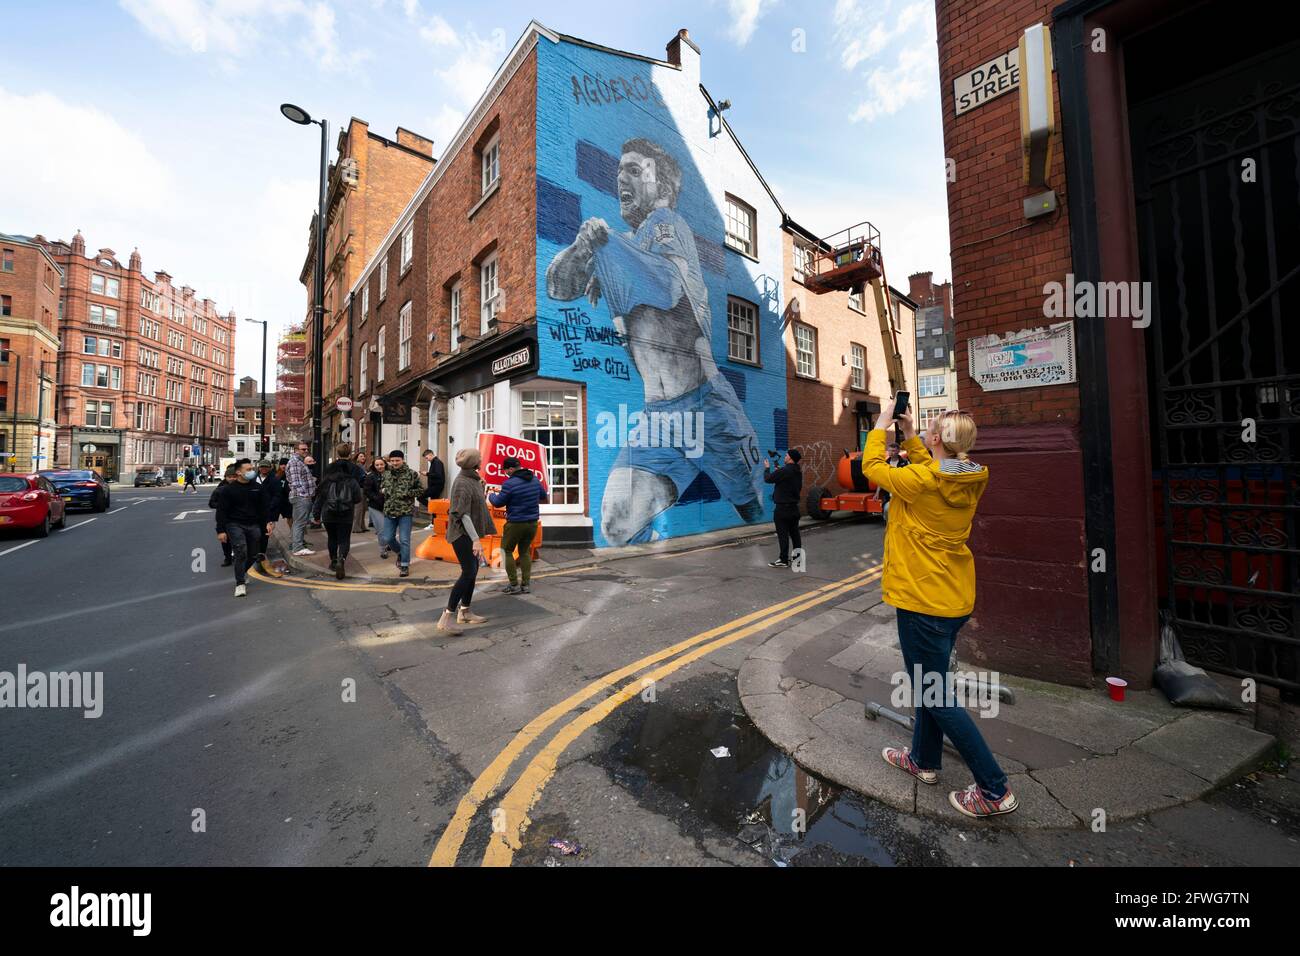 Manchester, UK, 22rd May 2021. A new mural of Manchester City footballer Sergio Aguero is seen in ManchesterÕs Northern Quarter the day before the team are presented with the English Premier League trophy, Manchester, UK. Aguero has agreed to sign for Barcelona on a two-year contract when his Manchester City deal expires next month. Credit: Jon Super/Alamy Live News. Stock Photo